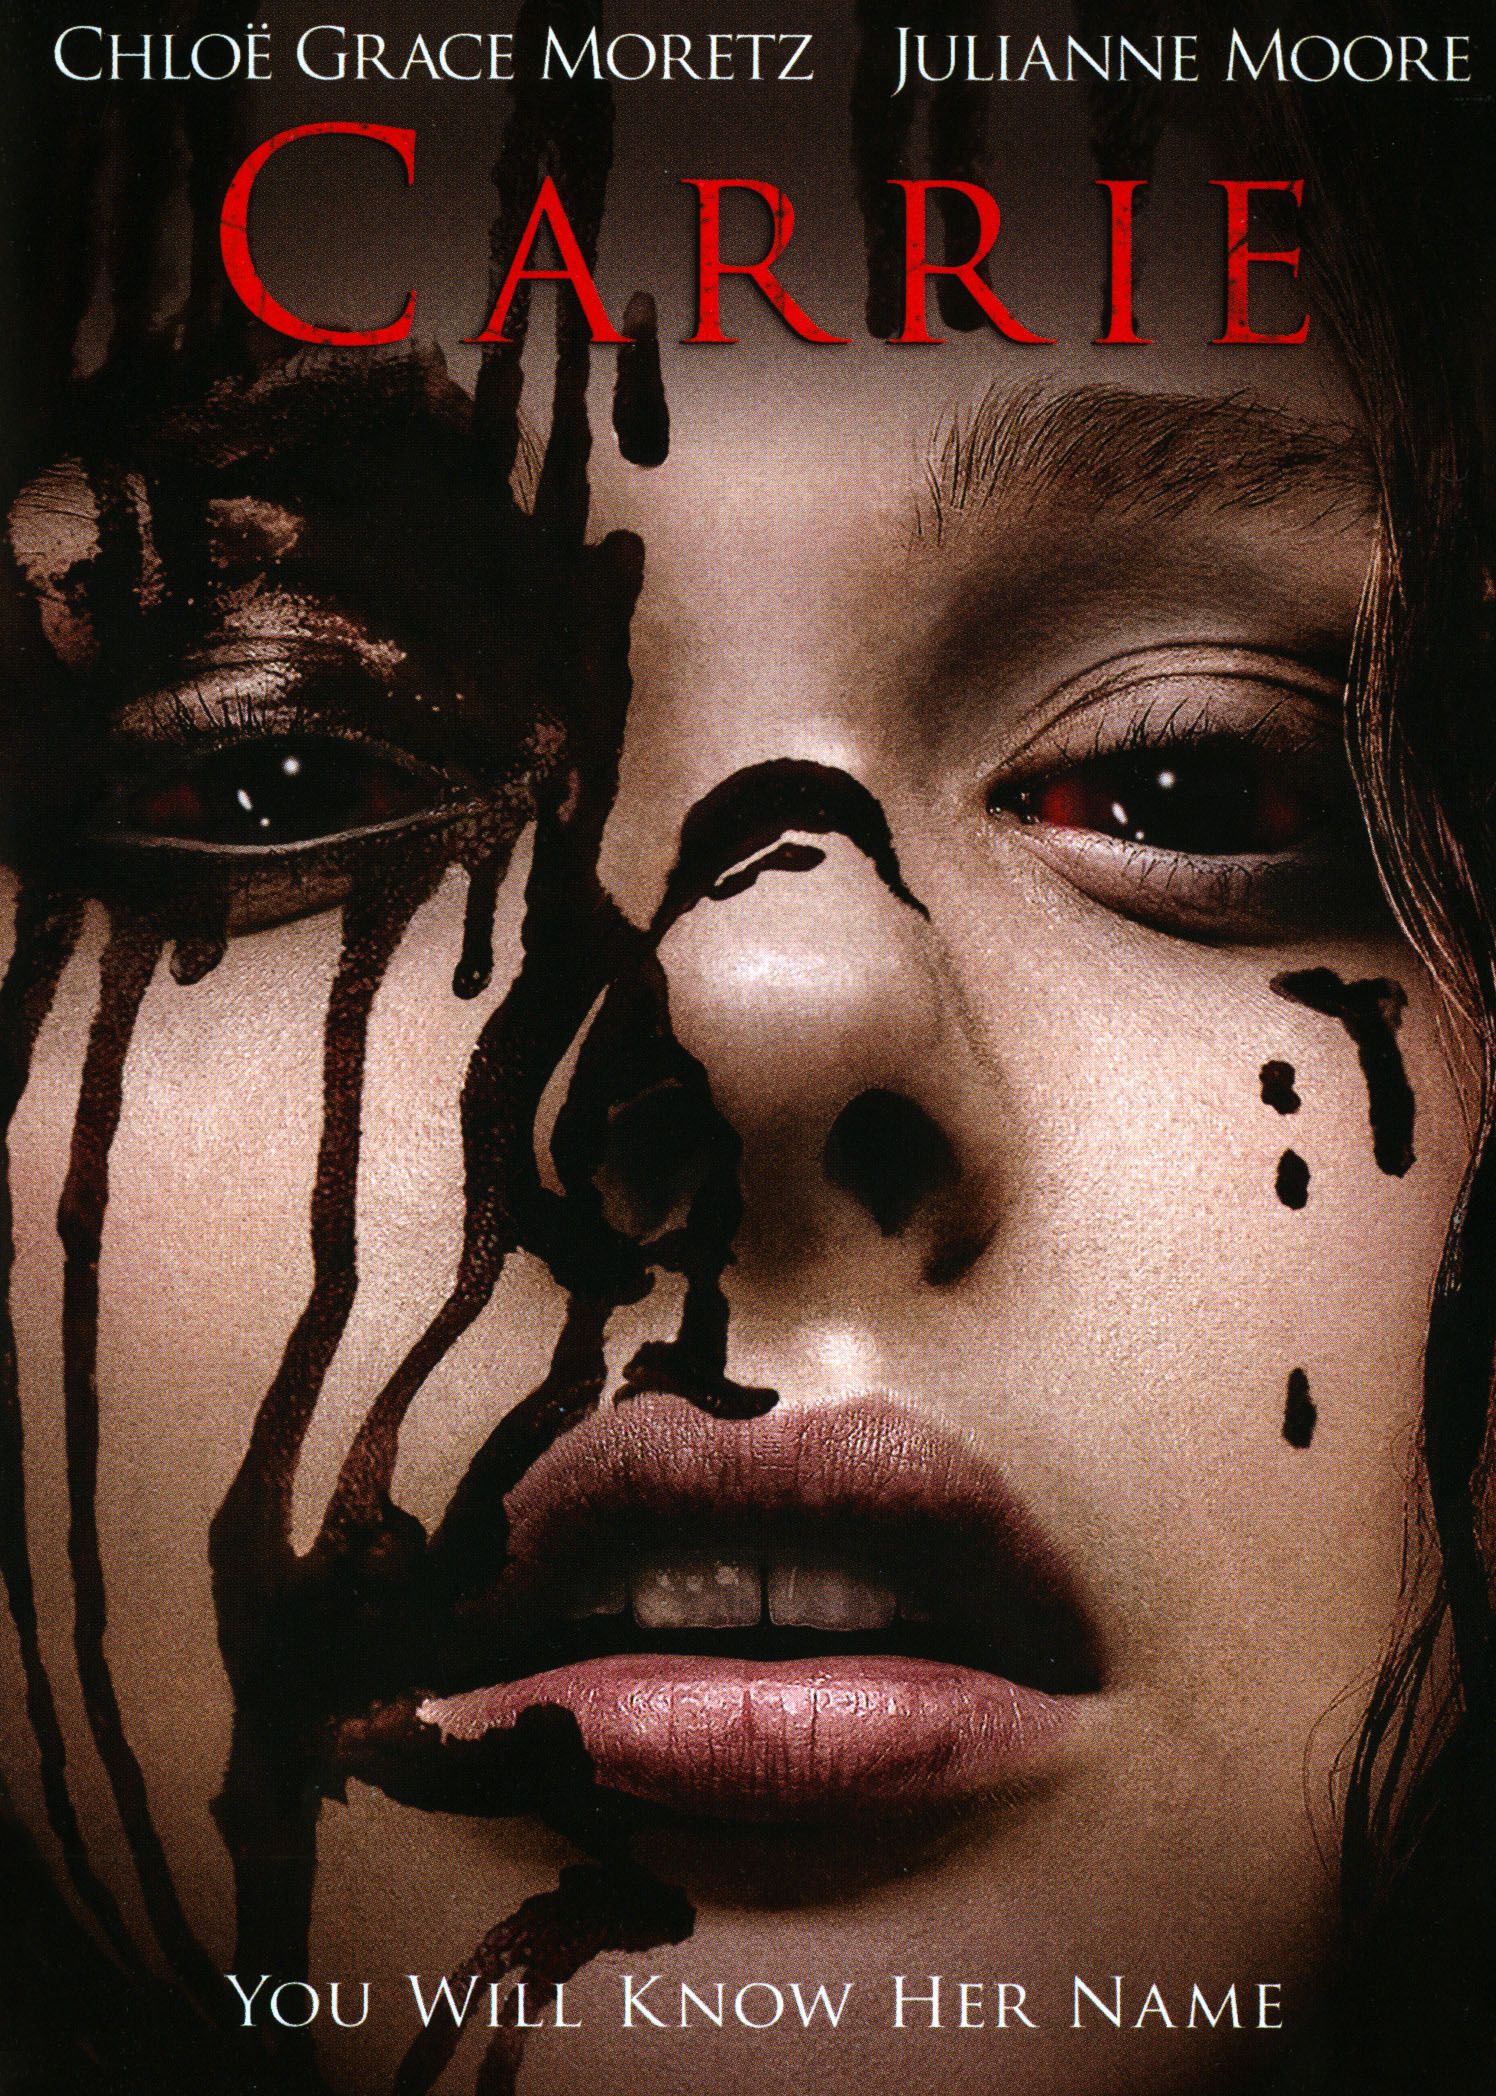 Carrie 2013 Movie Poster